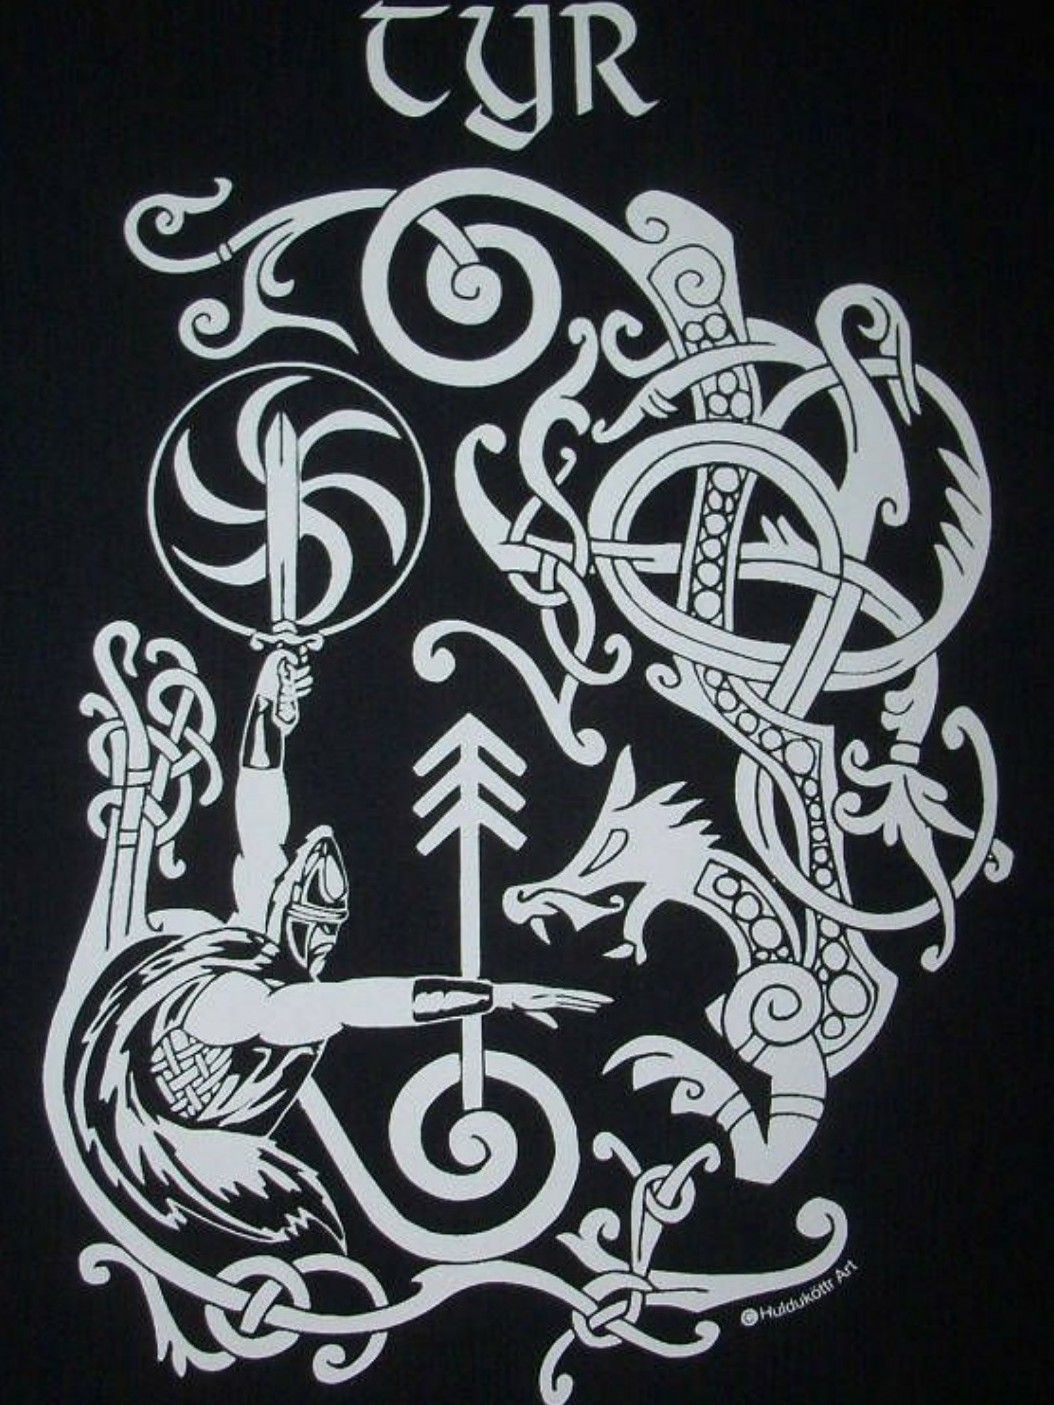 Need some ideas on how to make this tattoo idea better Trying to keep a  balance between a modernistic look and CelticNordic pattern design   rNorse